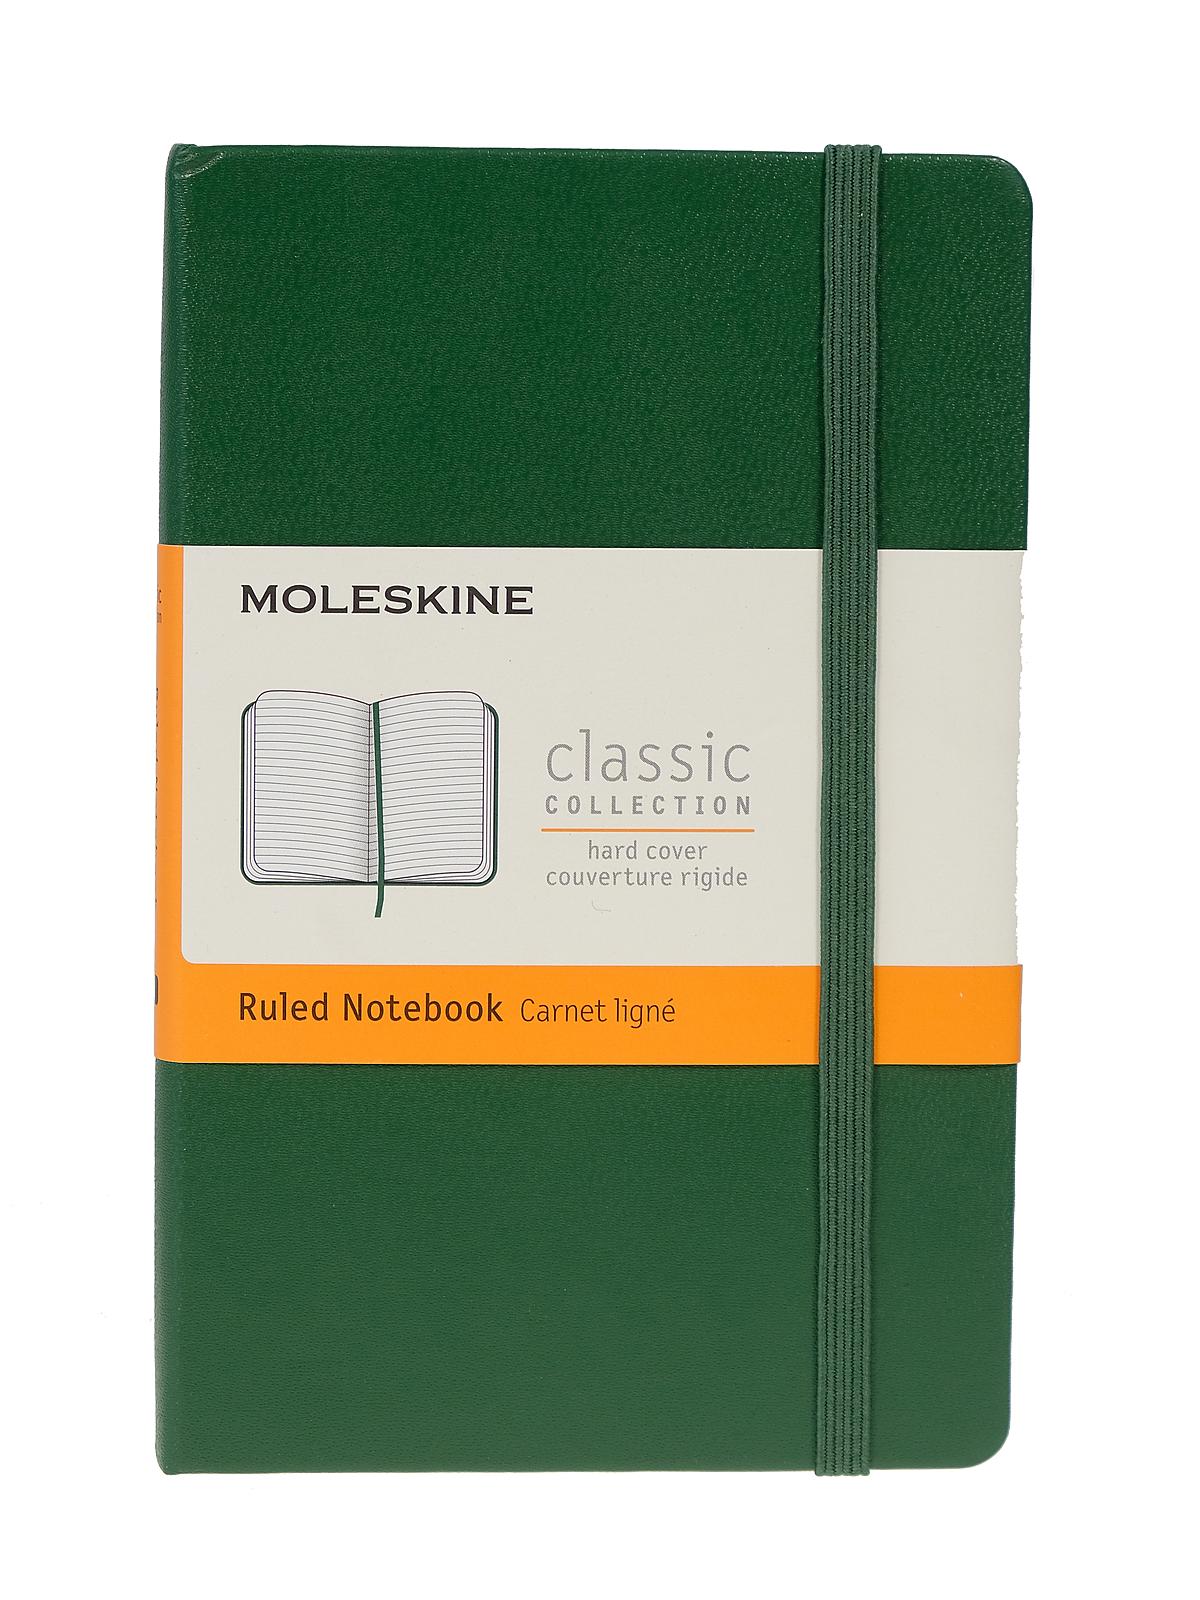 Classic Hard Cover Notebooks Myrtle Green 3 1 2 In. X 5 1 2 In. 192 Pages, Lined